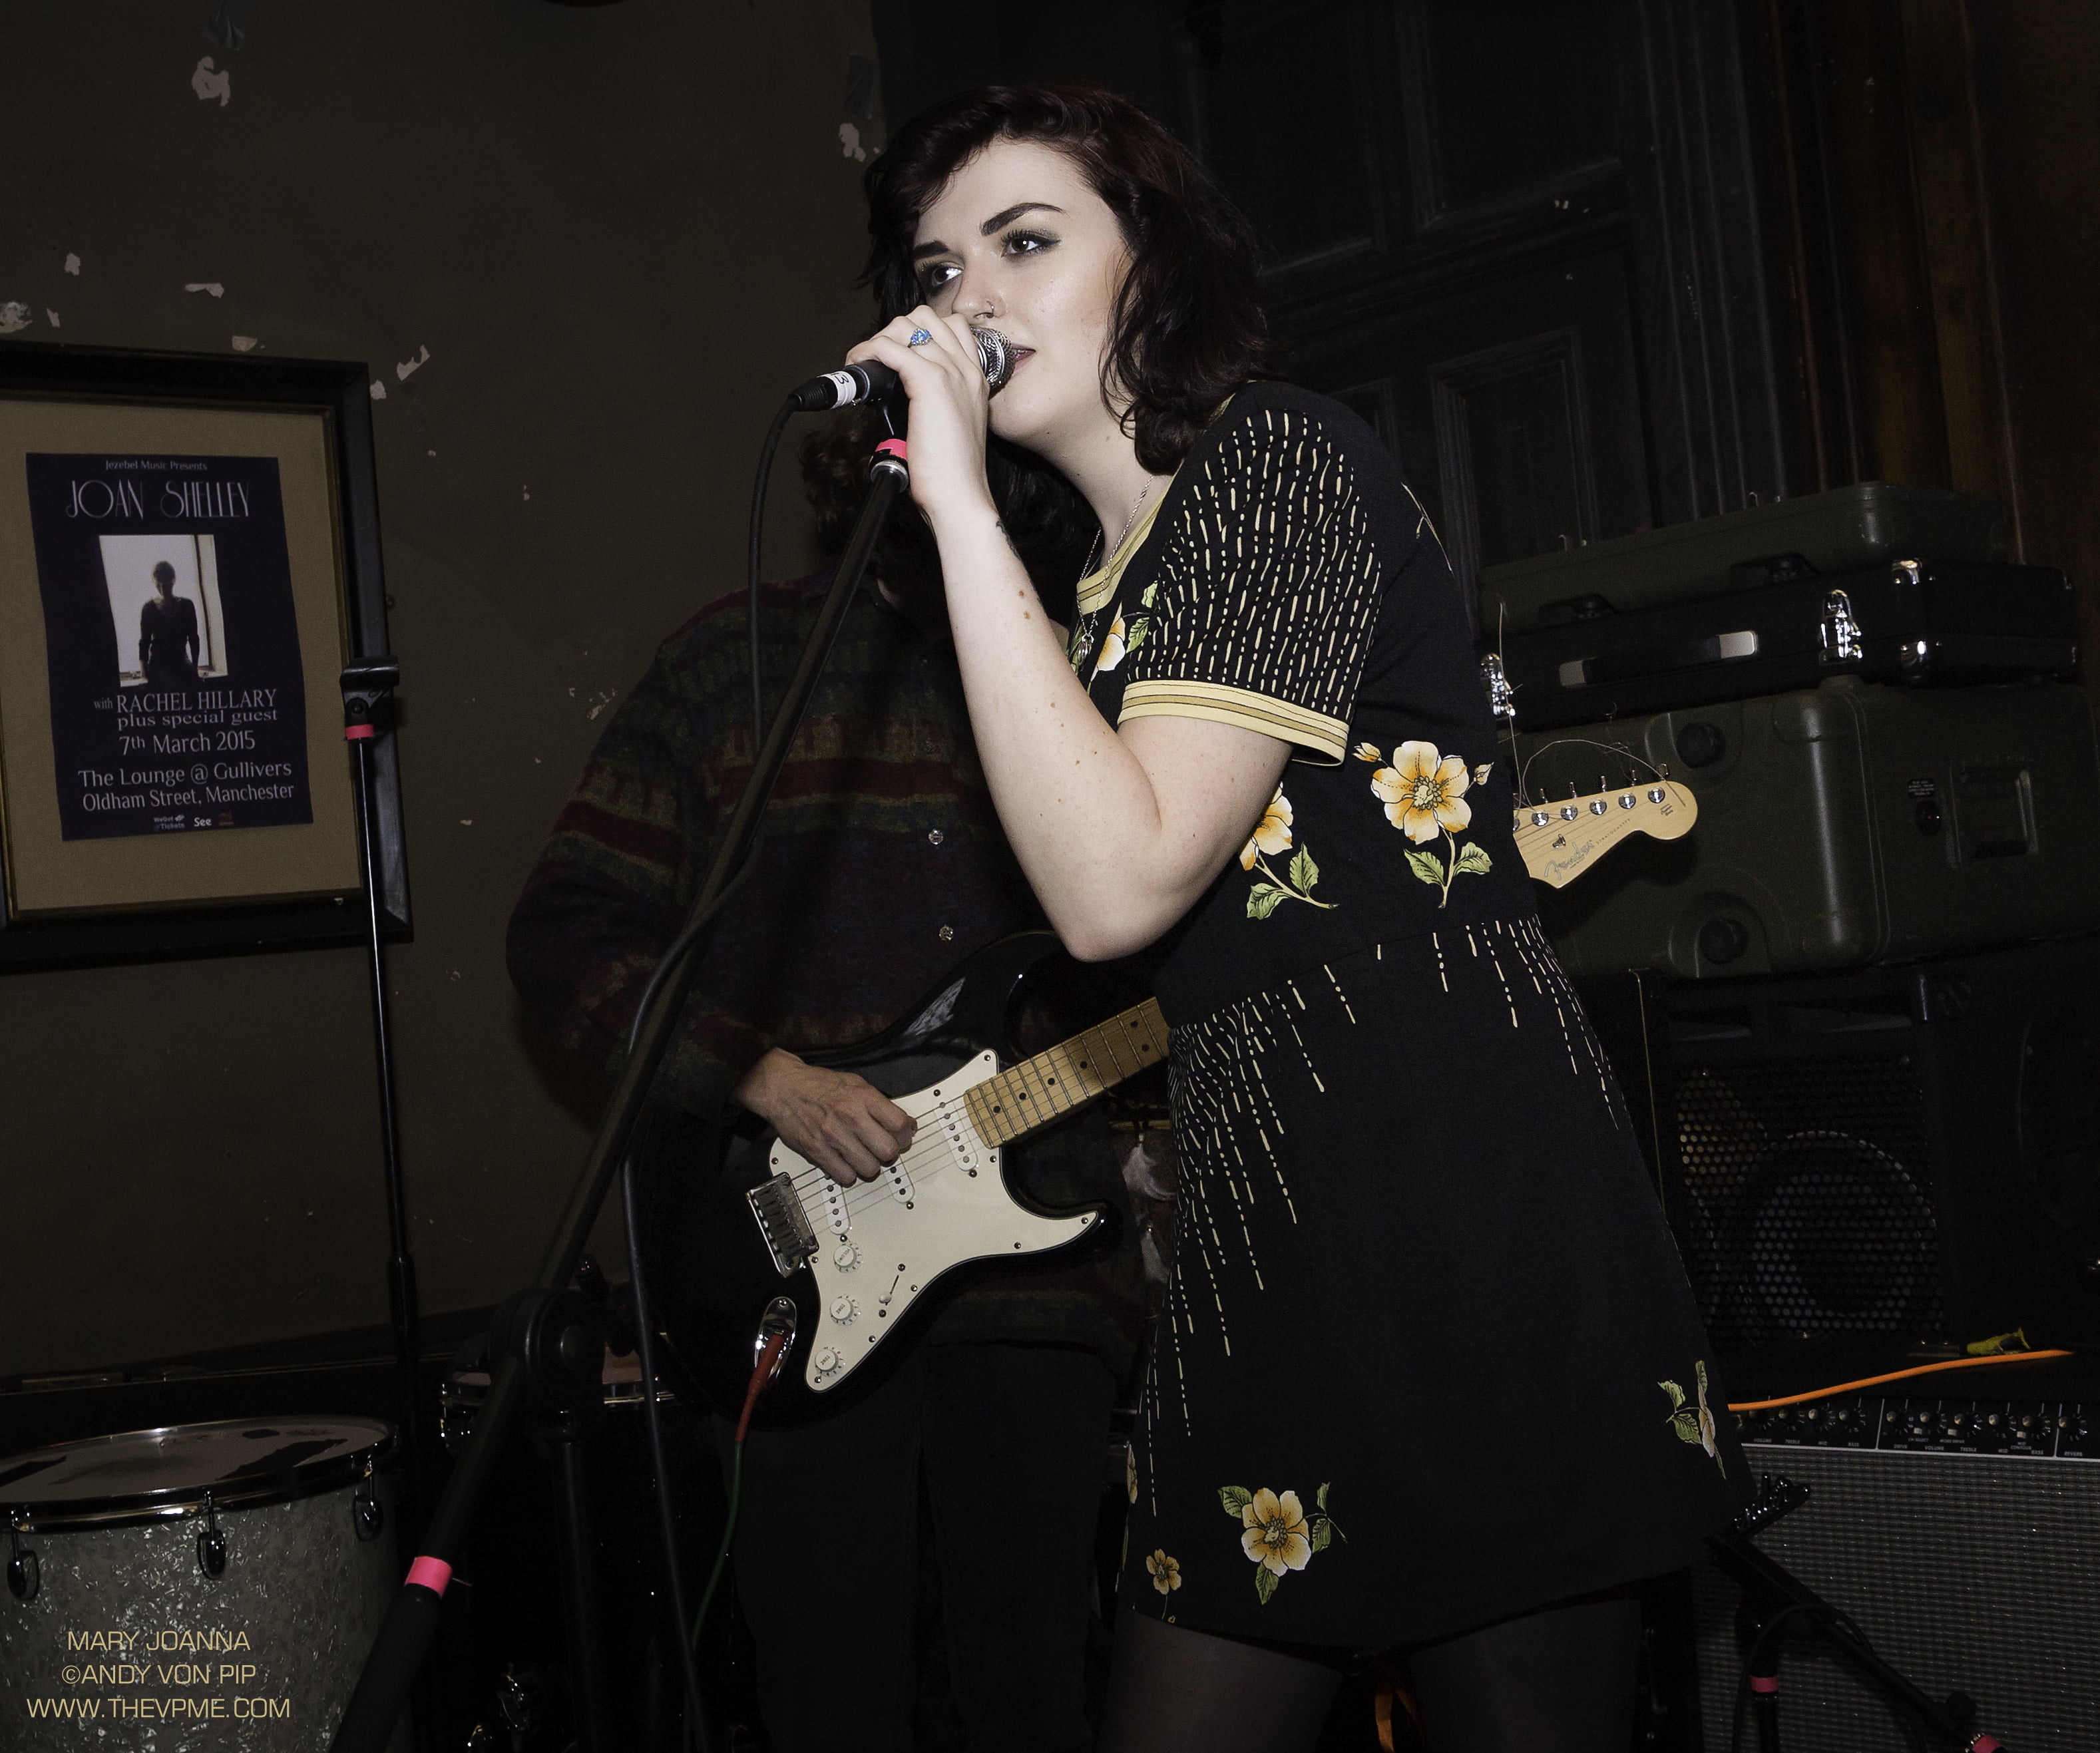 MARY JOANNA - Manchester 9 March 2015